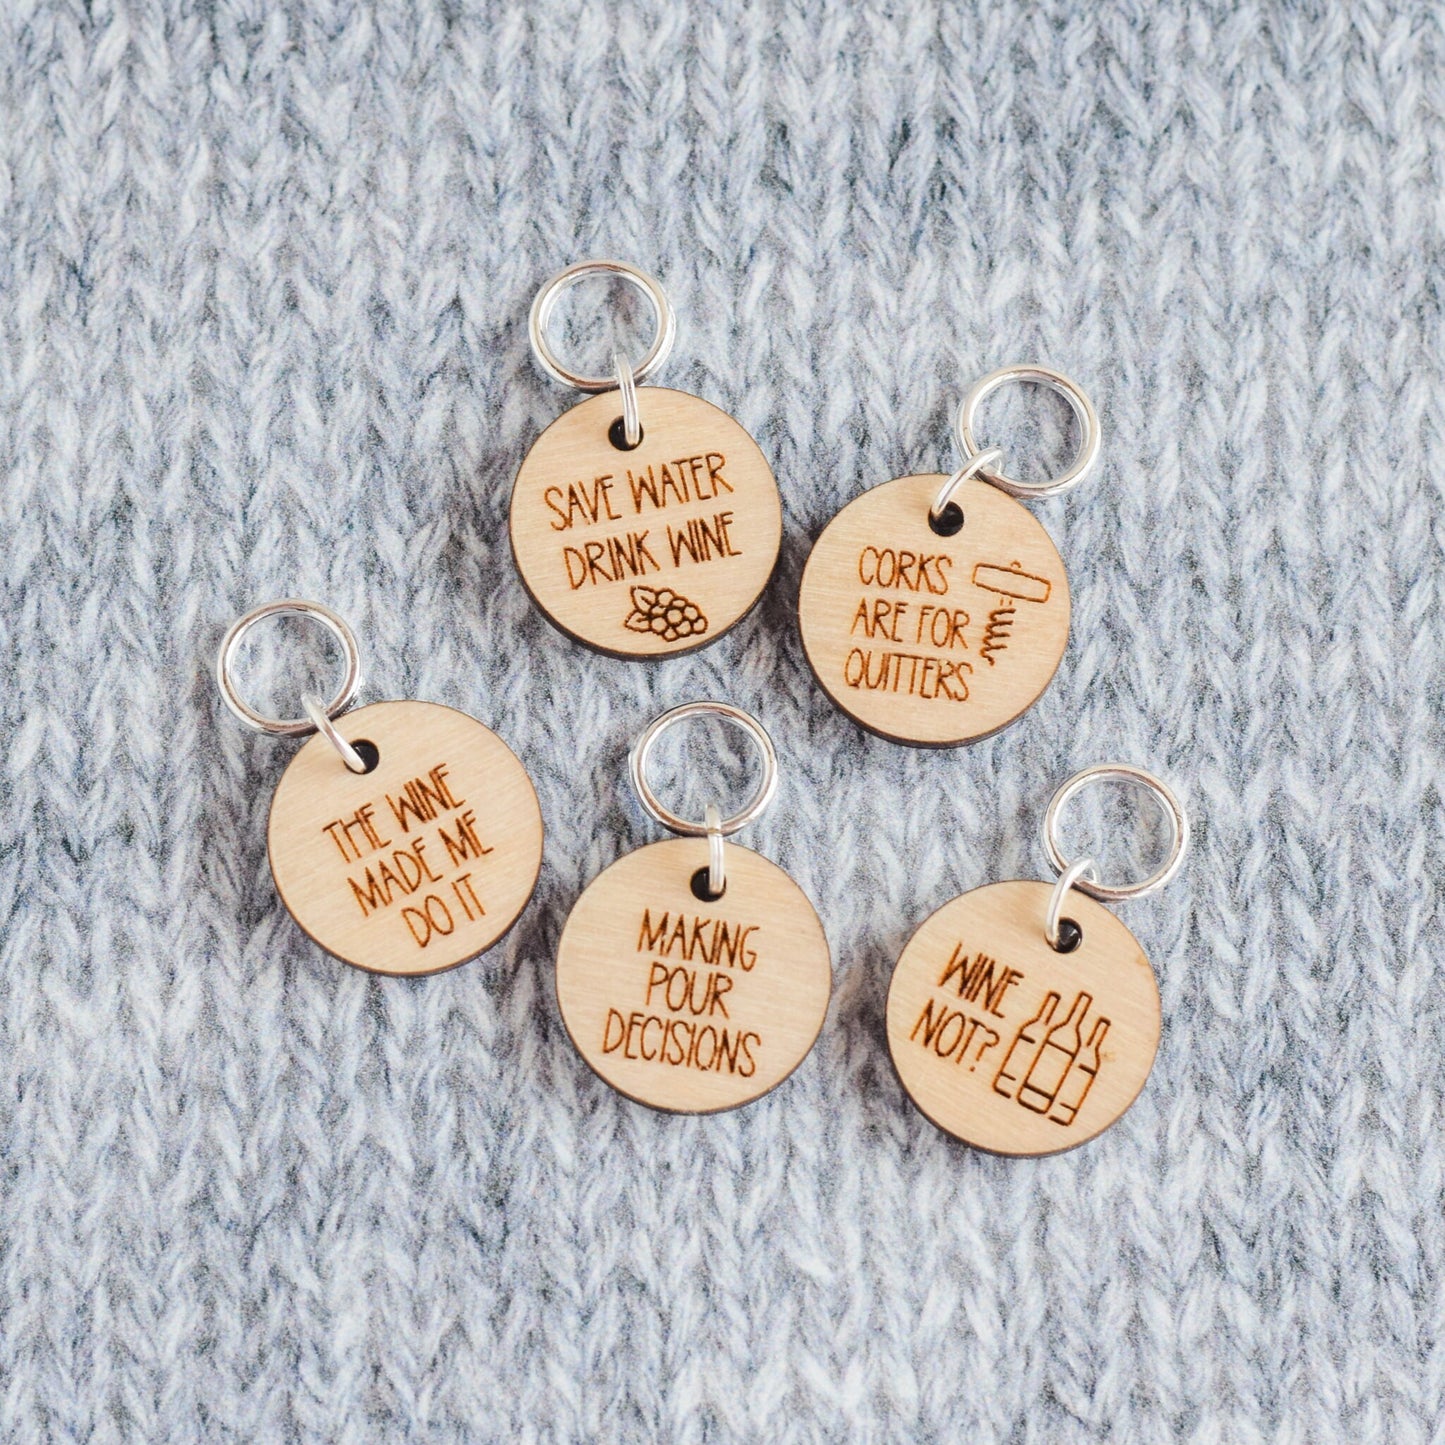 Set of 5 Stitch Markers, Wine, Laser Engraved Wood Stitch Markers, Funny Wine Sayings, Making Pour Decisions, Corks are for Quitters